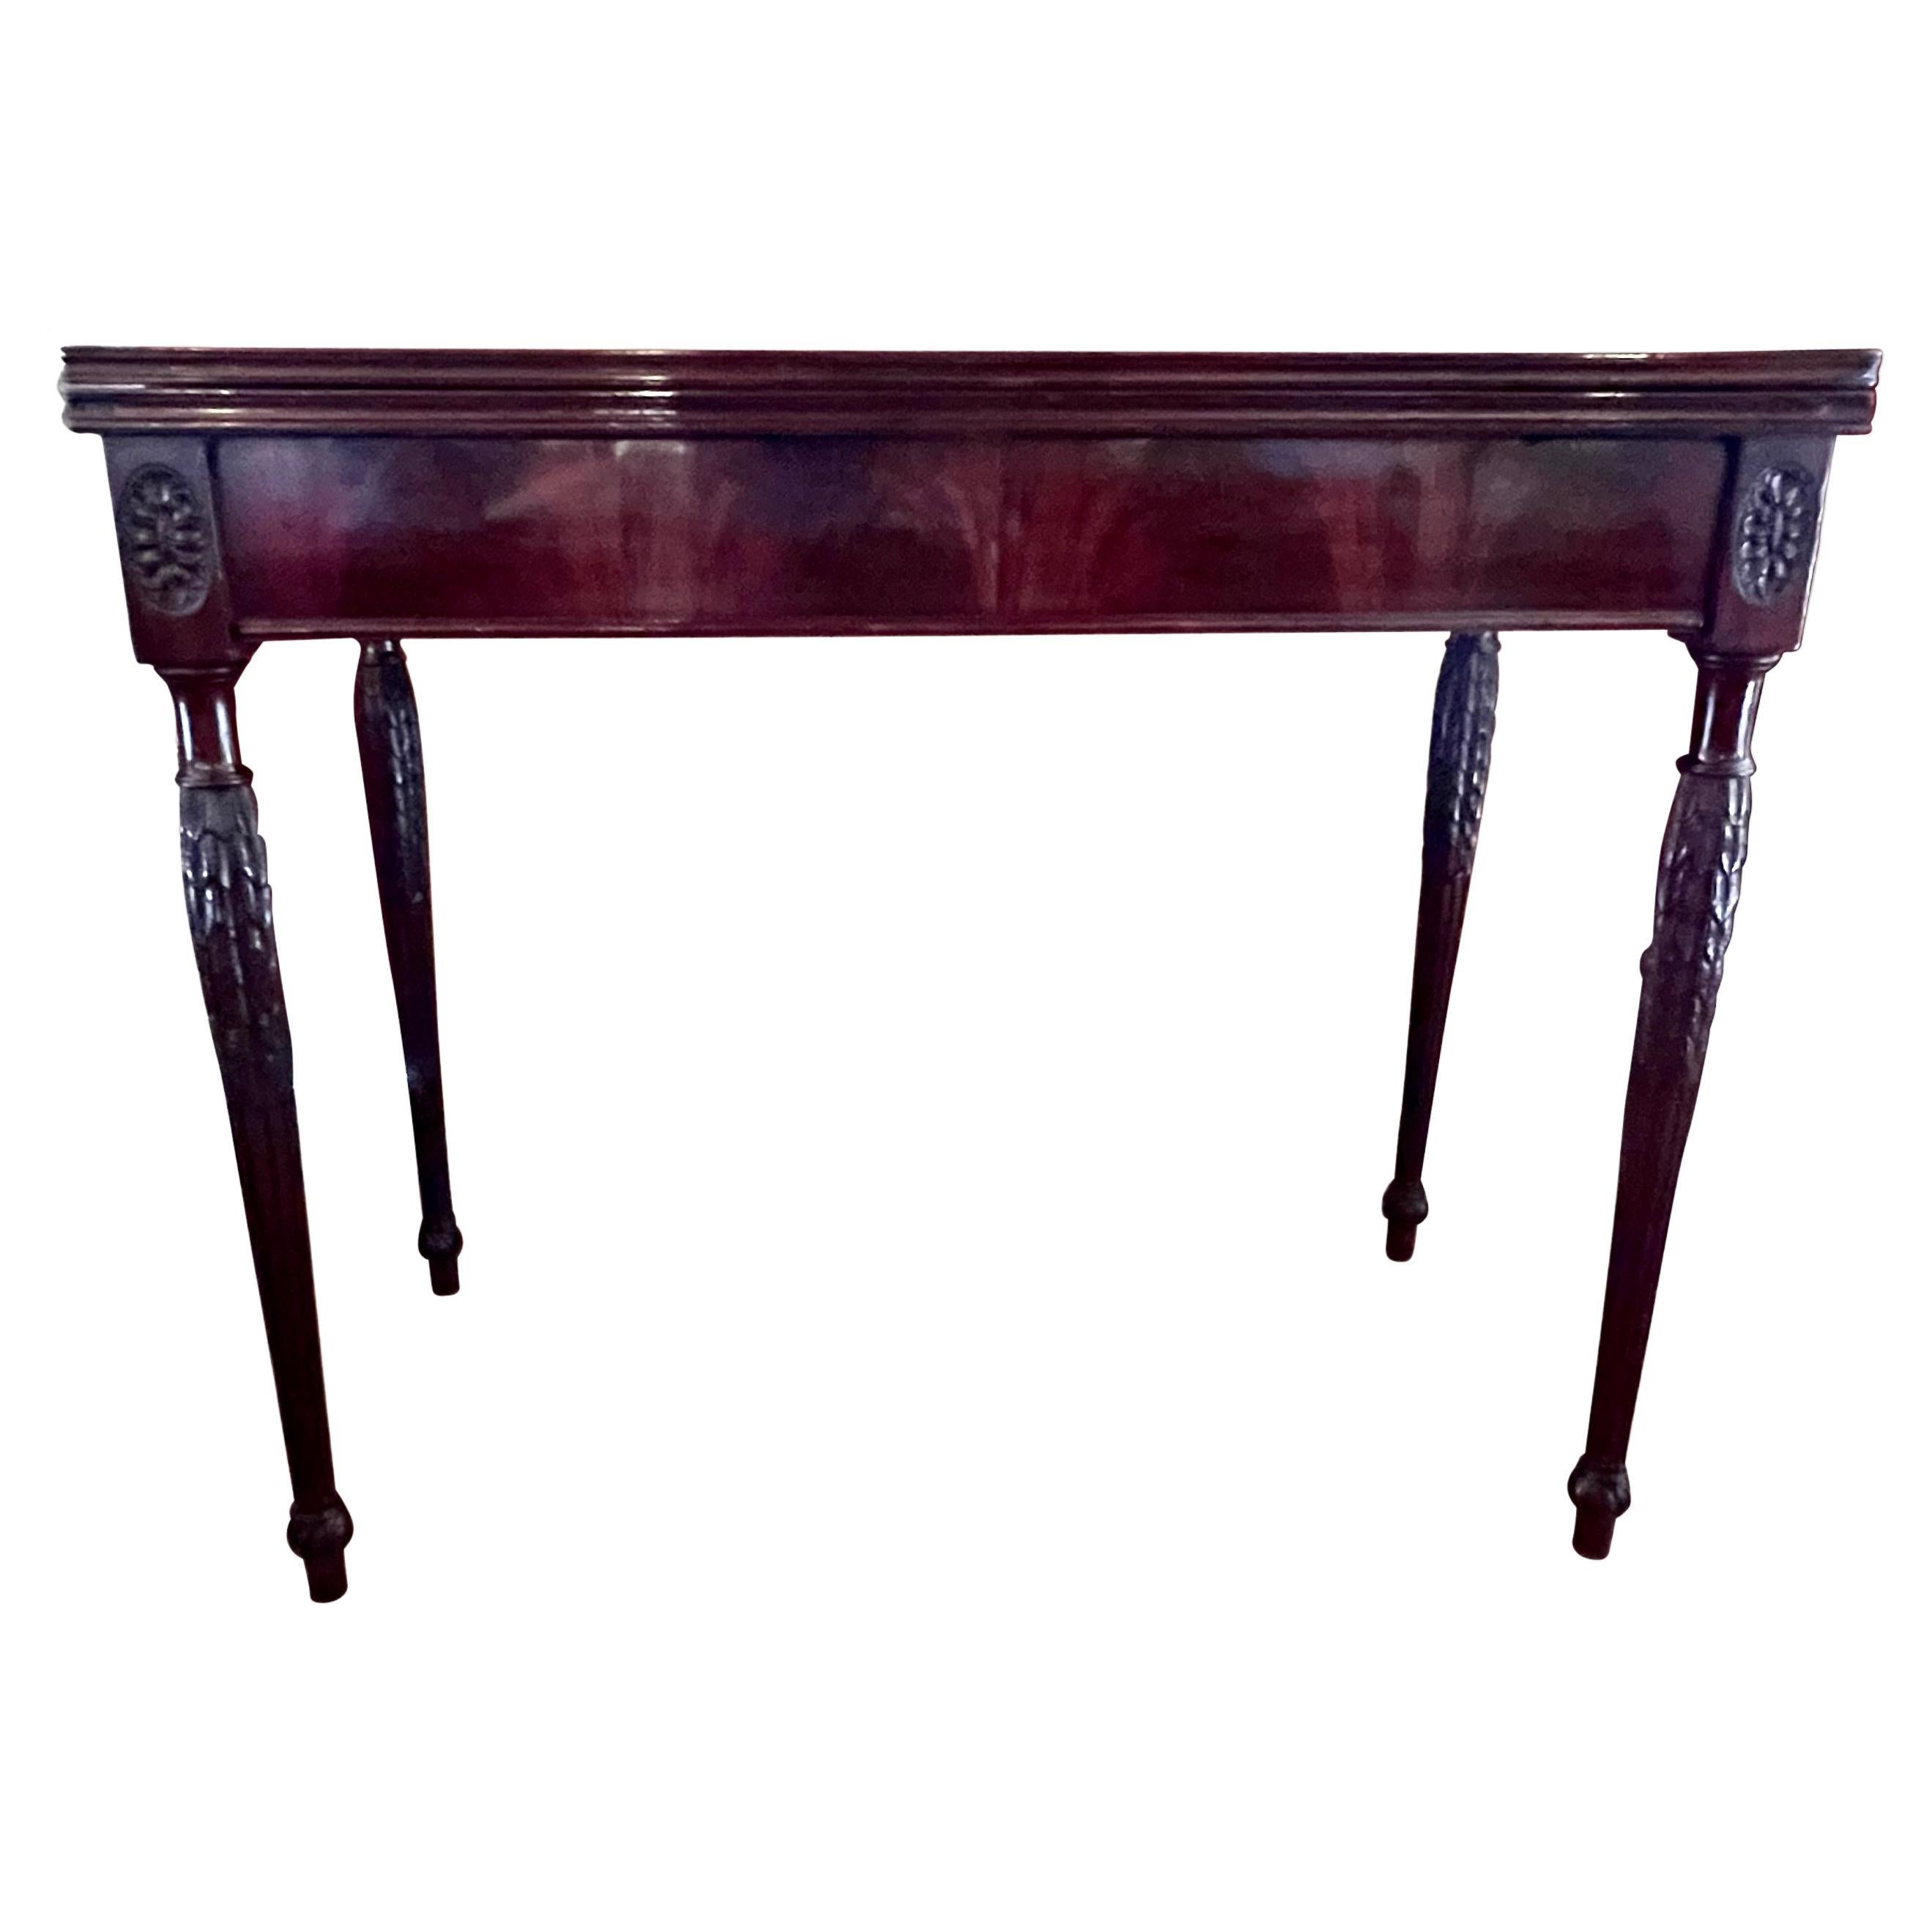 English Sheraton Mahogany Flip Top Games Table with Gilt-Tooled Leather Top 